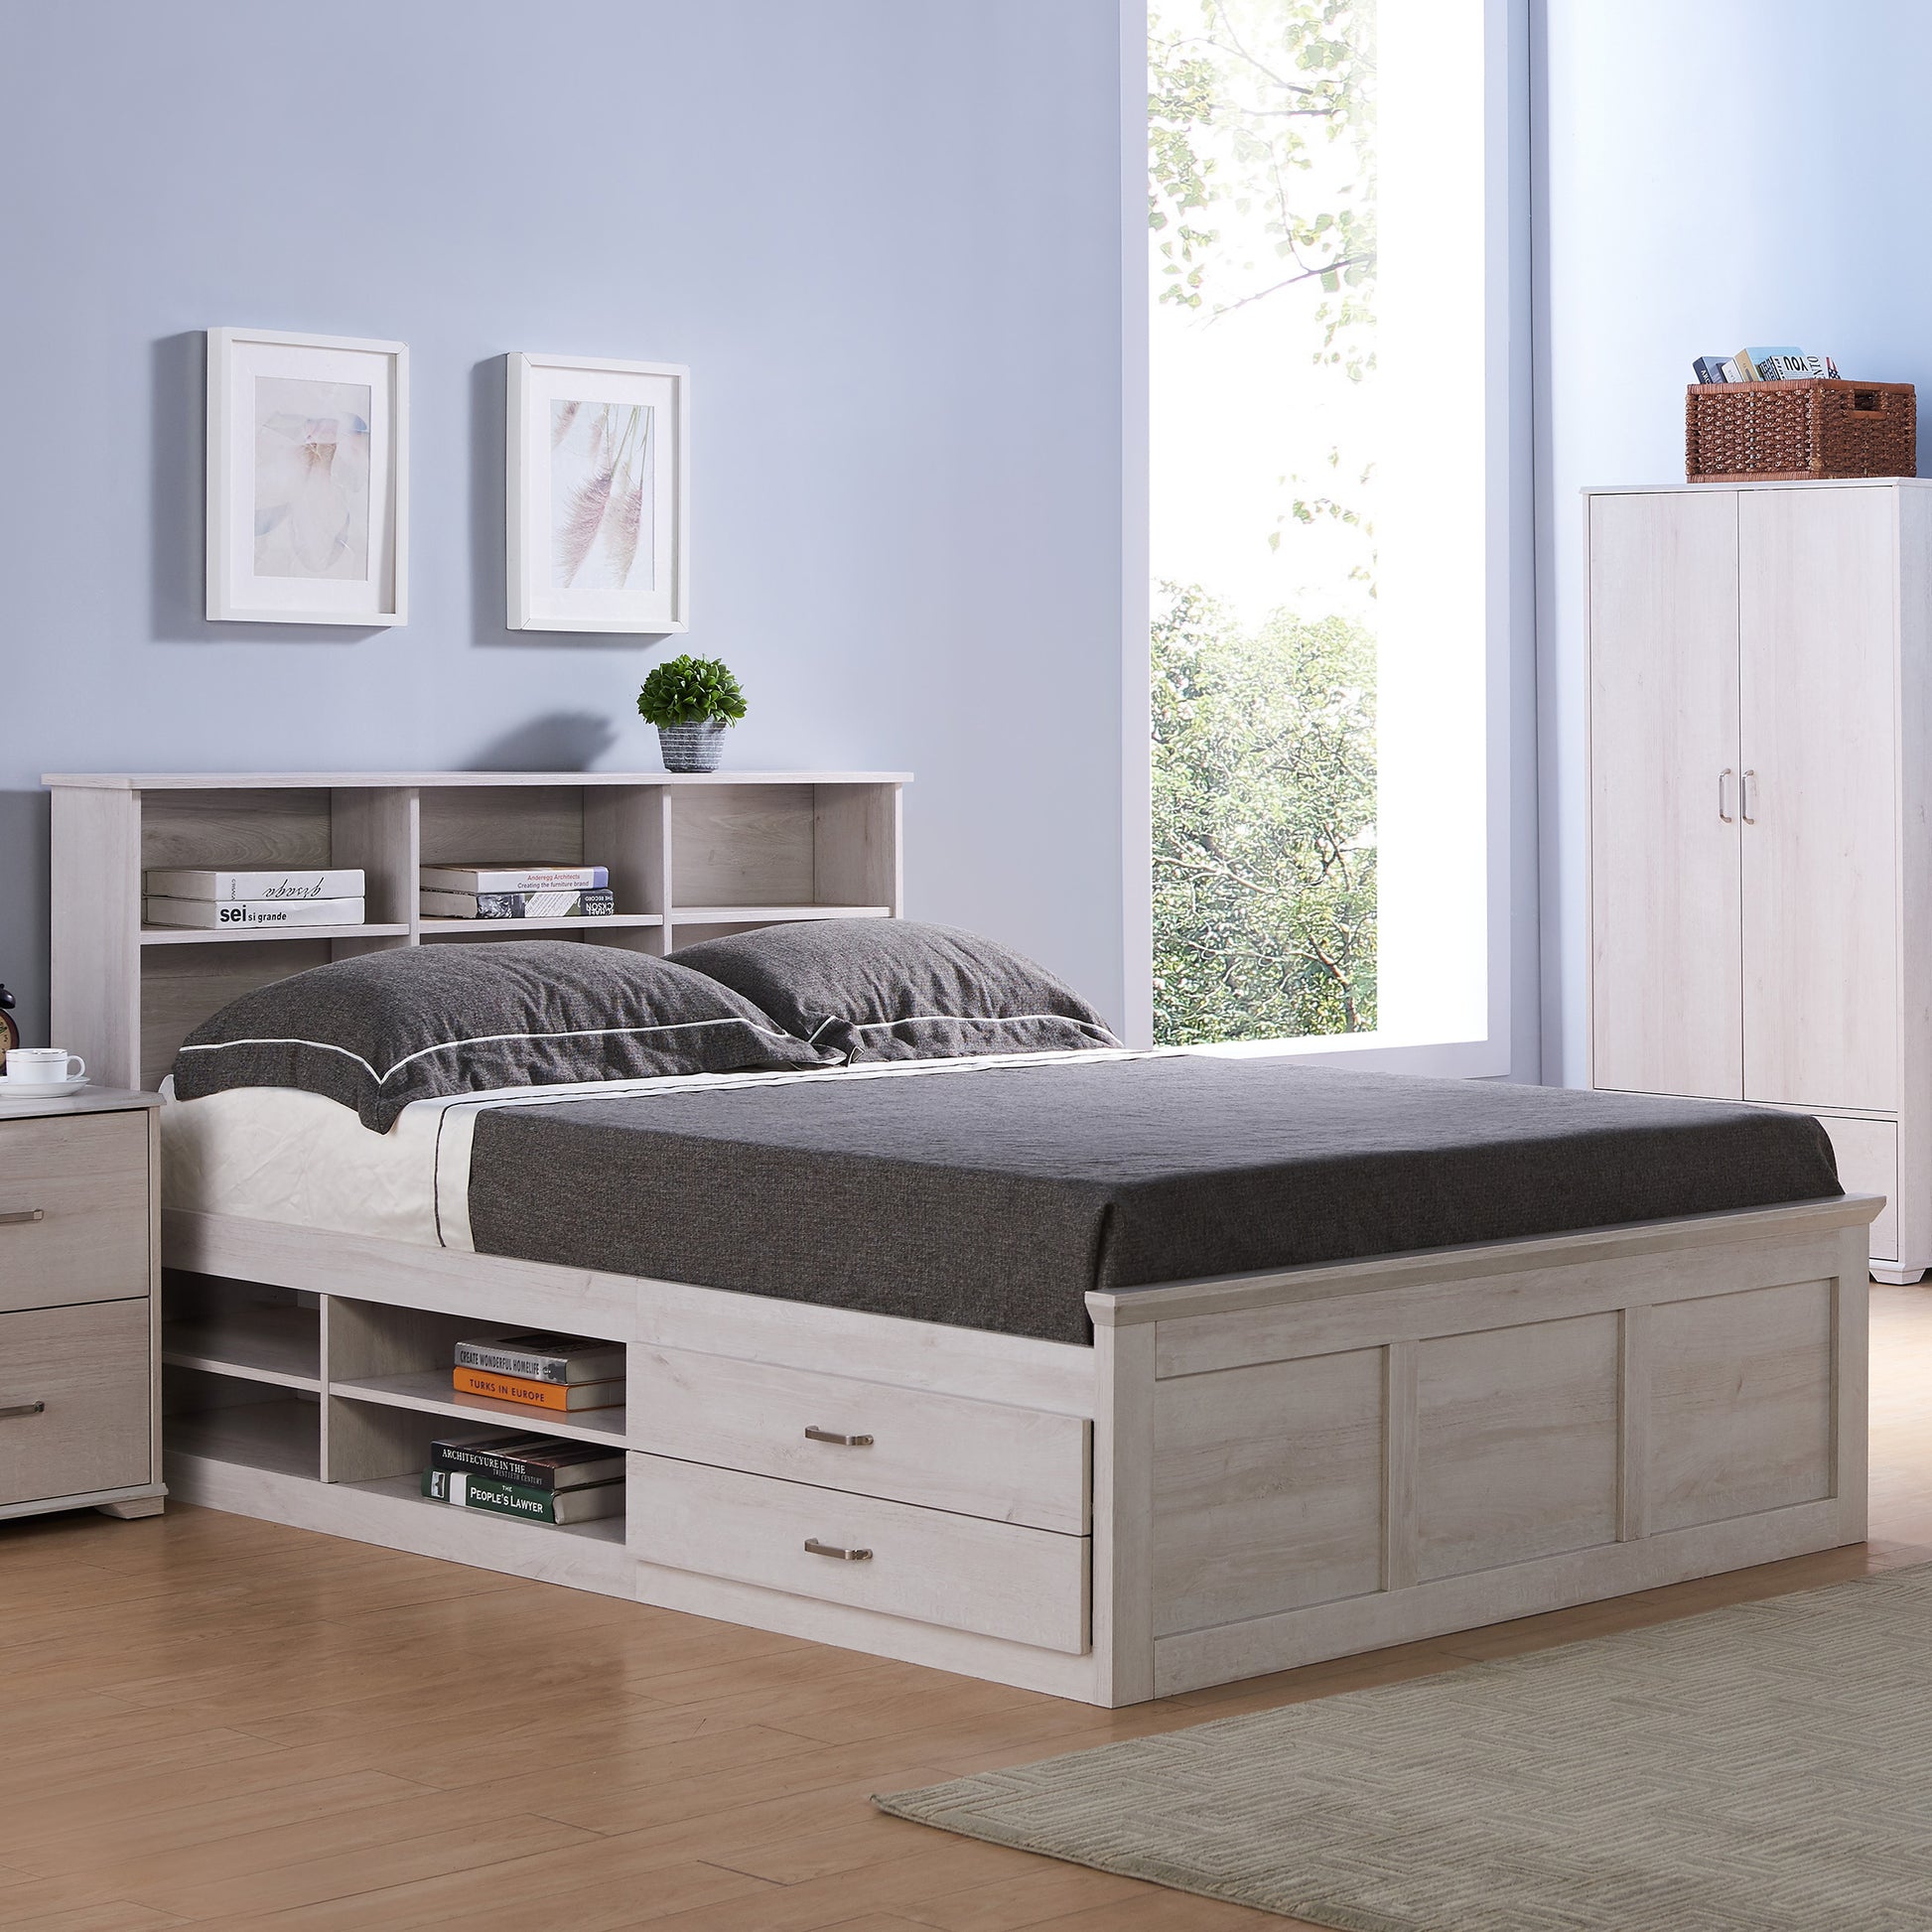 Right angled transitional white oak two-drawer four-shelf storage bed shown with optional bookcase headboard in a bedroom with accessories